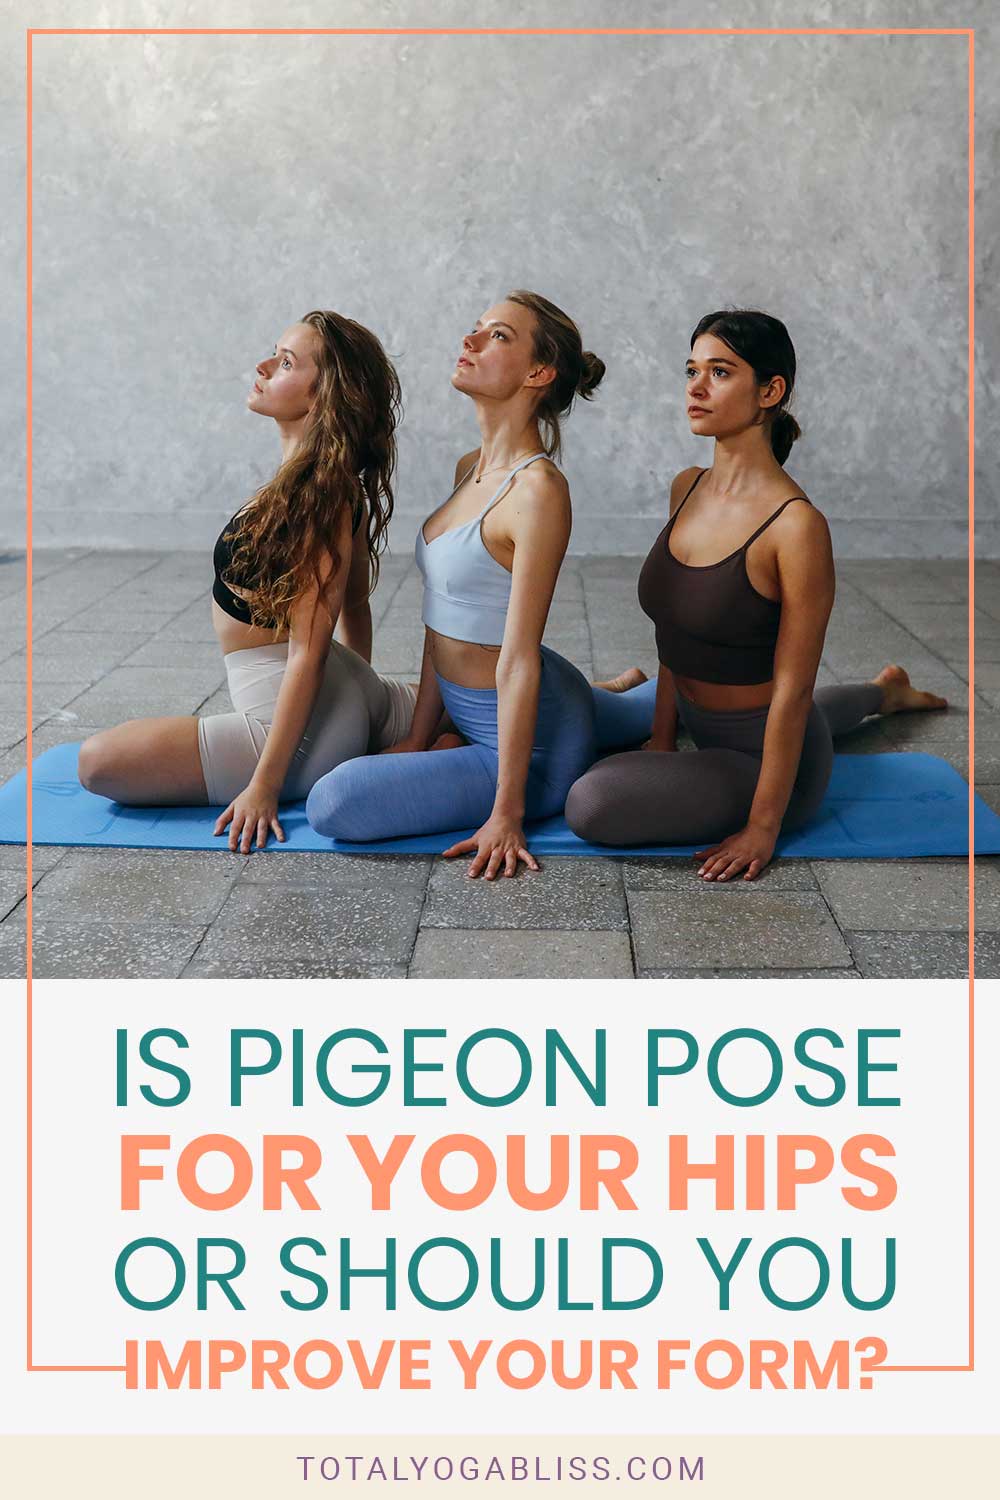 Ekam Yoga  The Sleeping Pigeon Pose httpsekamyogacomyogastarts99  Sleeping Pigeon Pose is a deep and powerful stretch for your hips Going  beyond the basic pigeon pose this next step increases both the